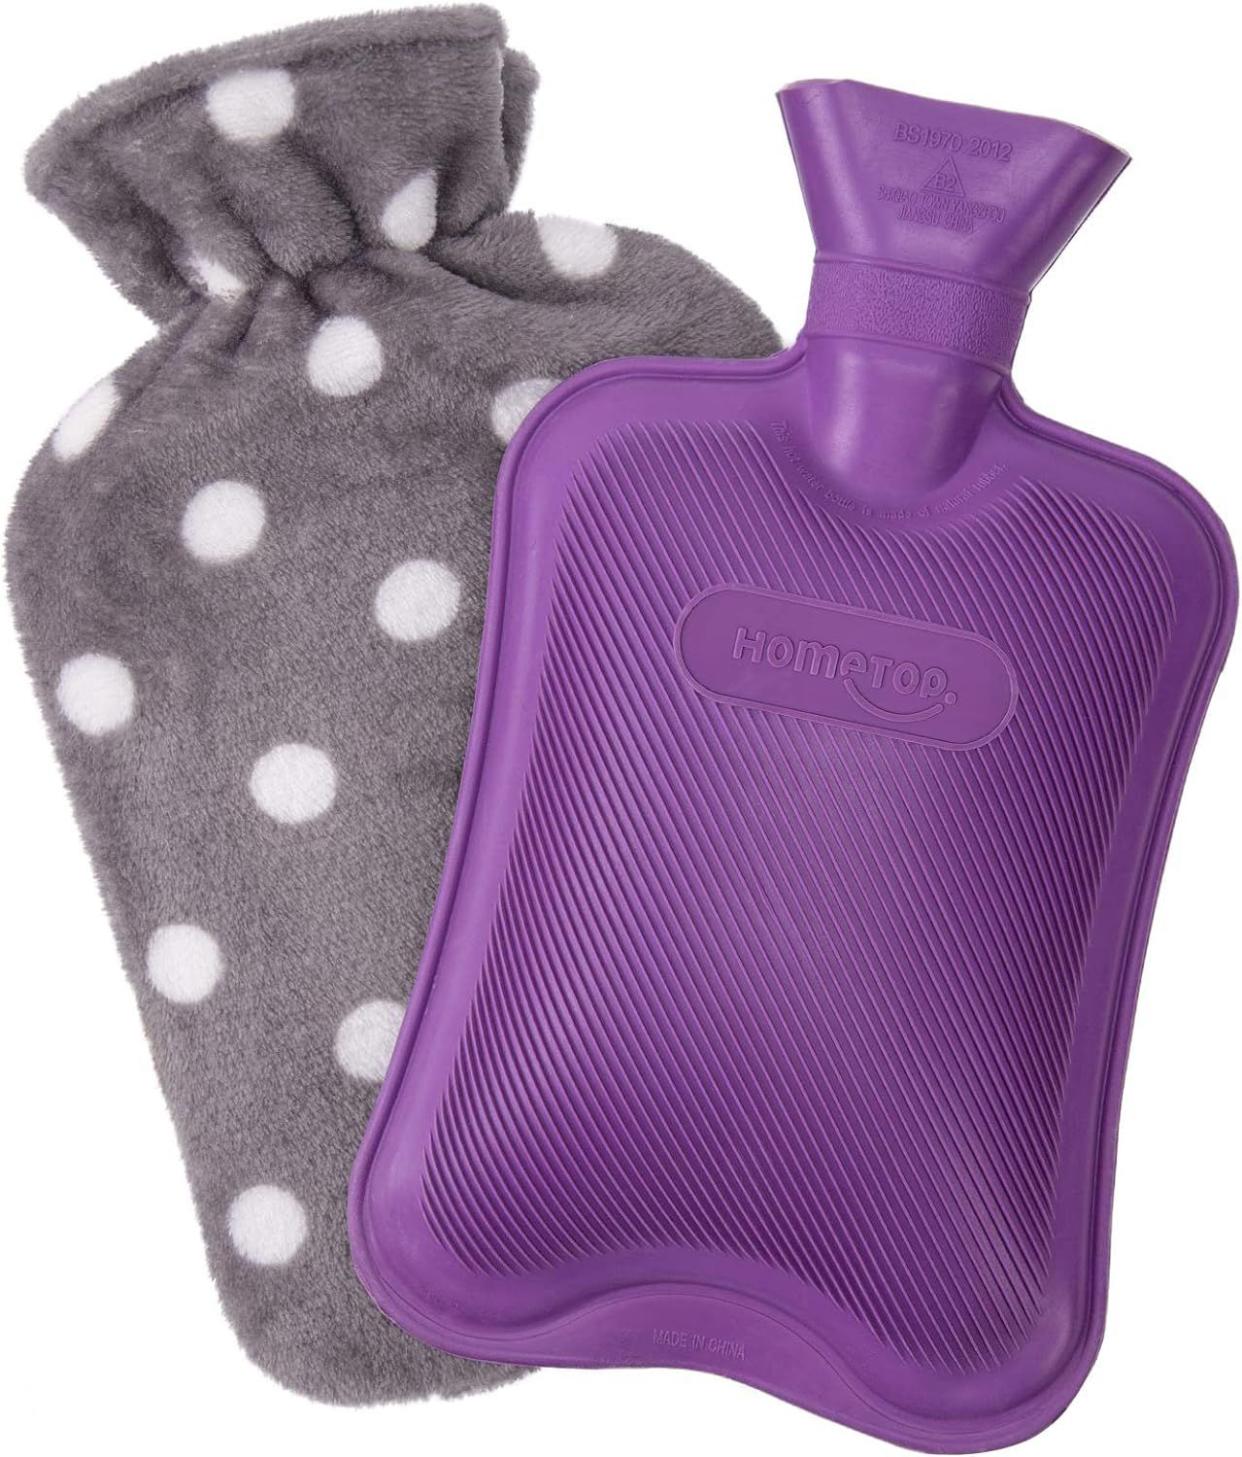 HomeTop Premium Classic Rubber Hot or Cold Water Bottle